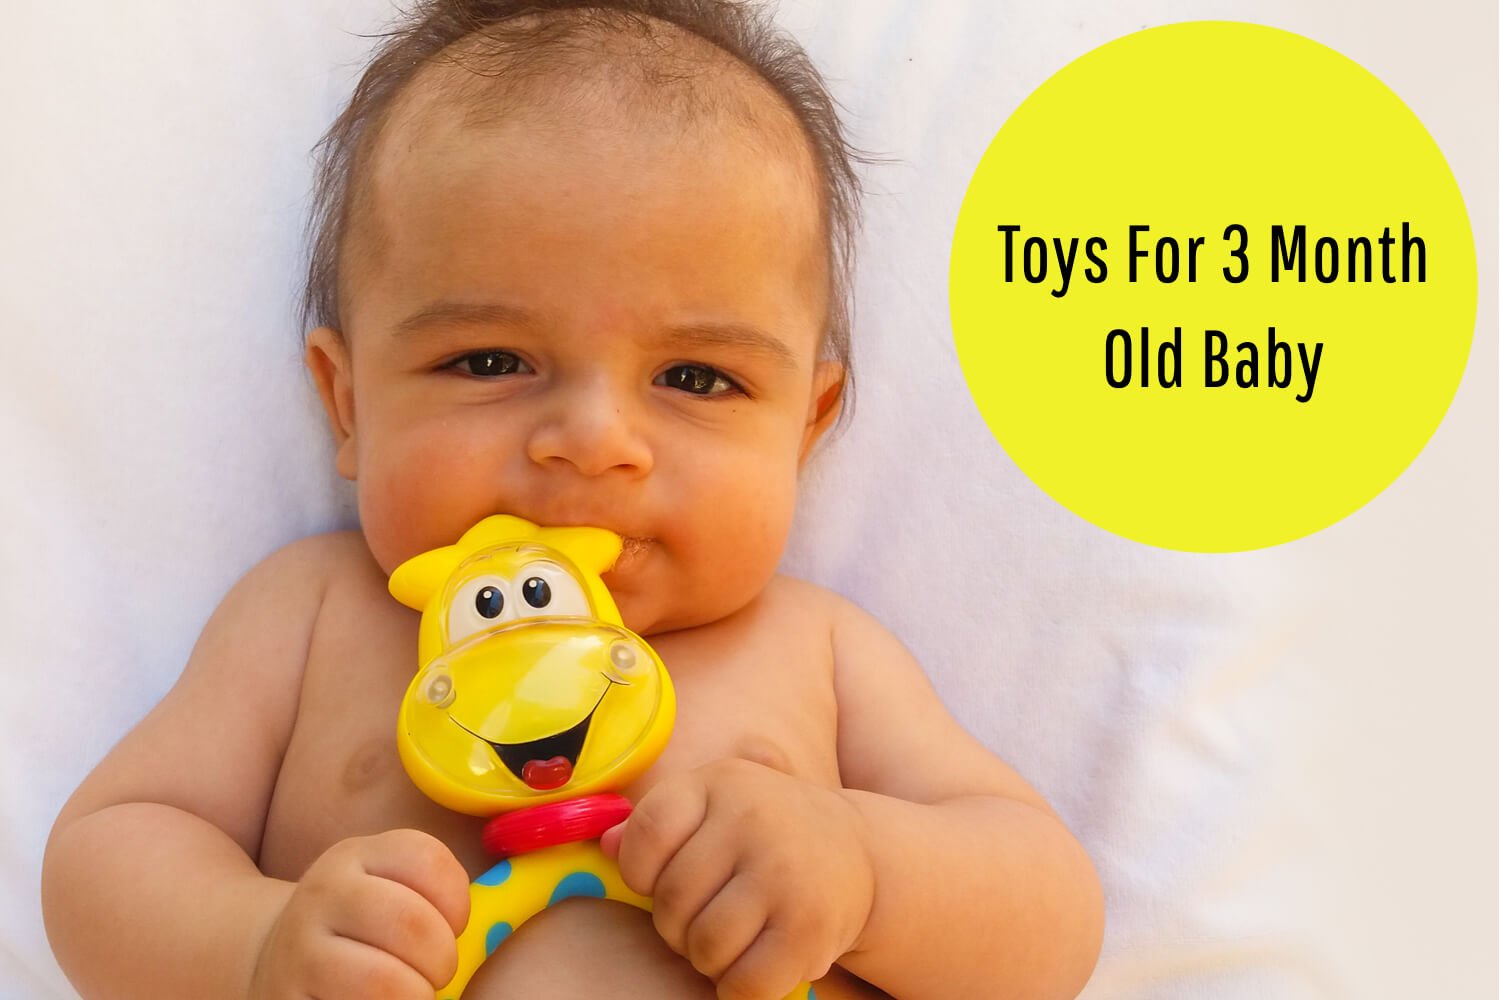 Toys For 3 Month Old Baby